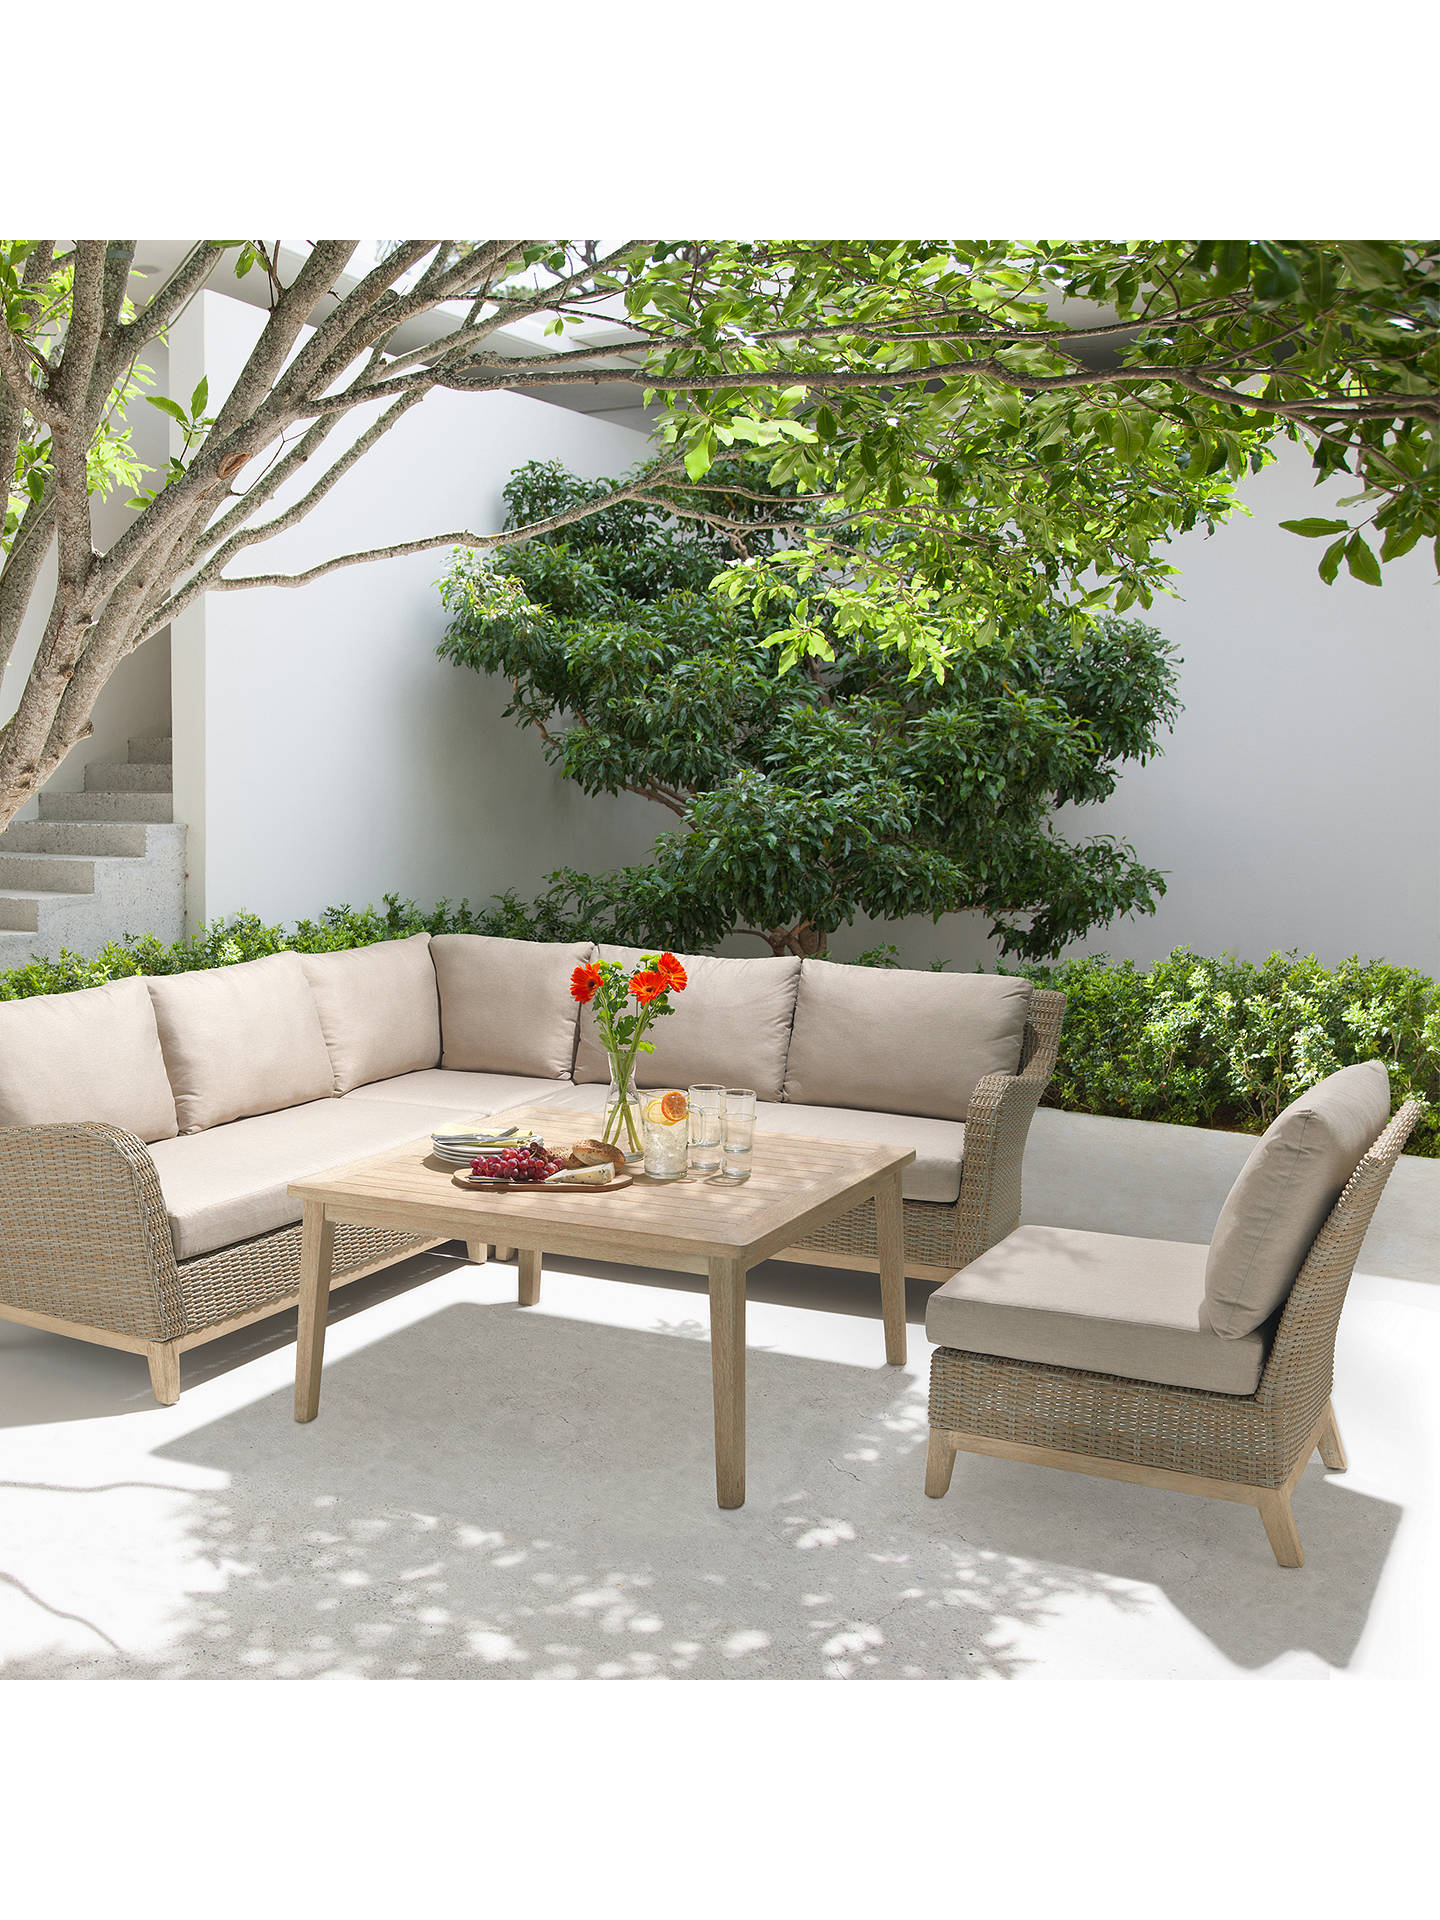 KETTLER Cora 5 Seater Garden Table and Chairs Lounging ...